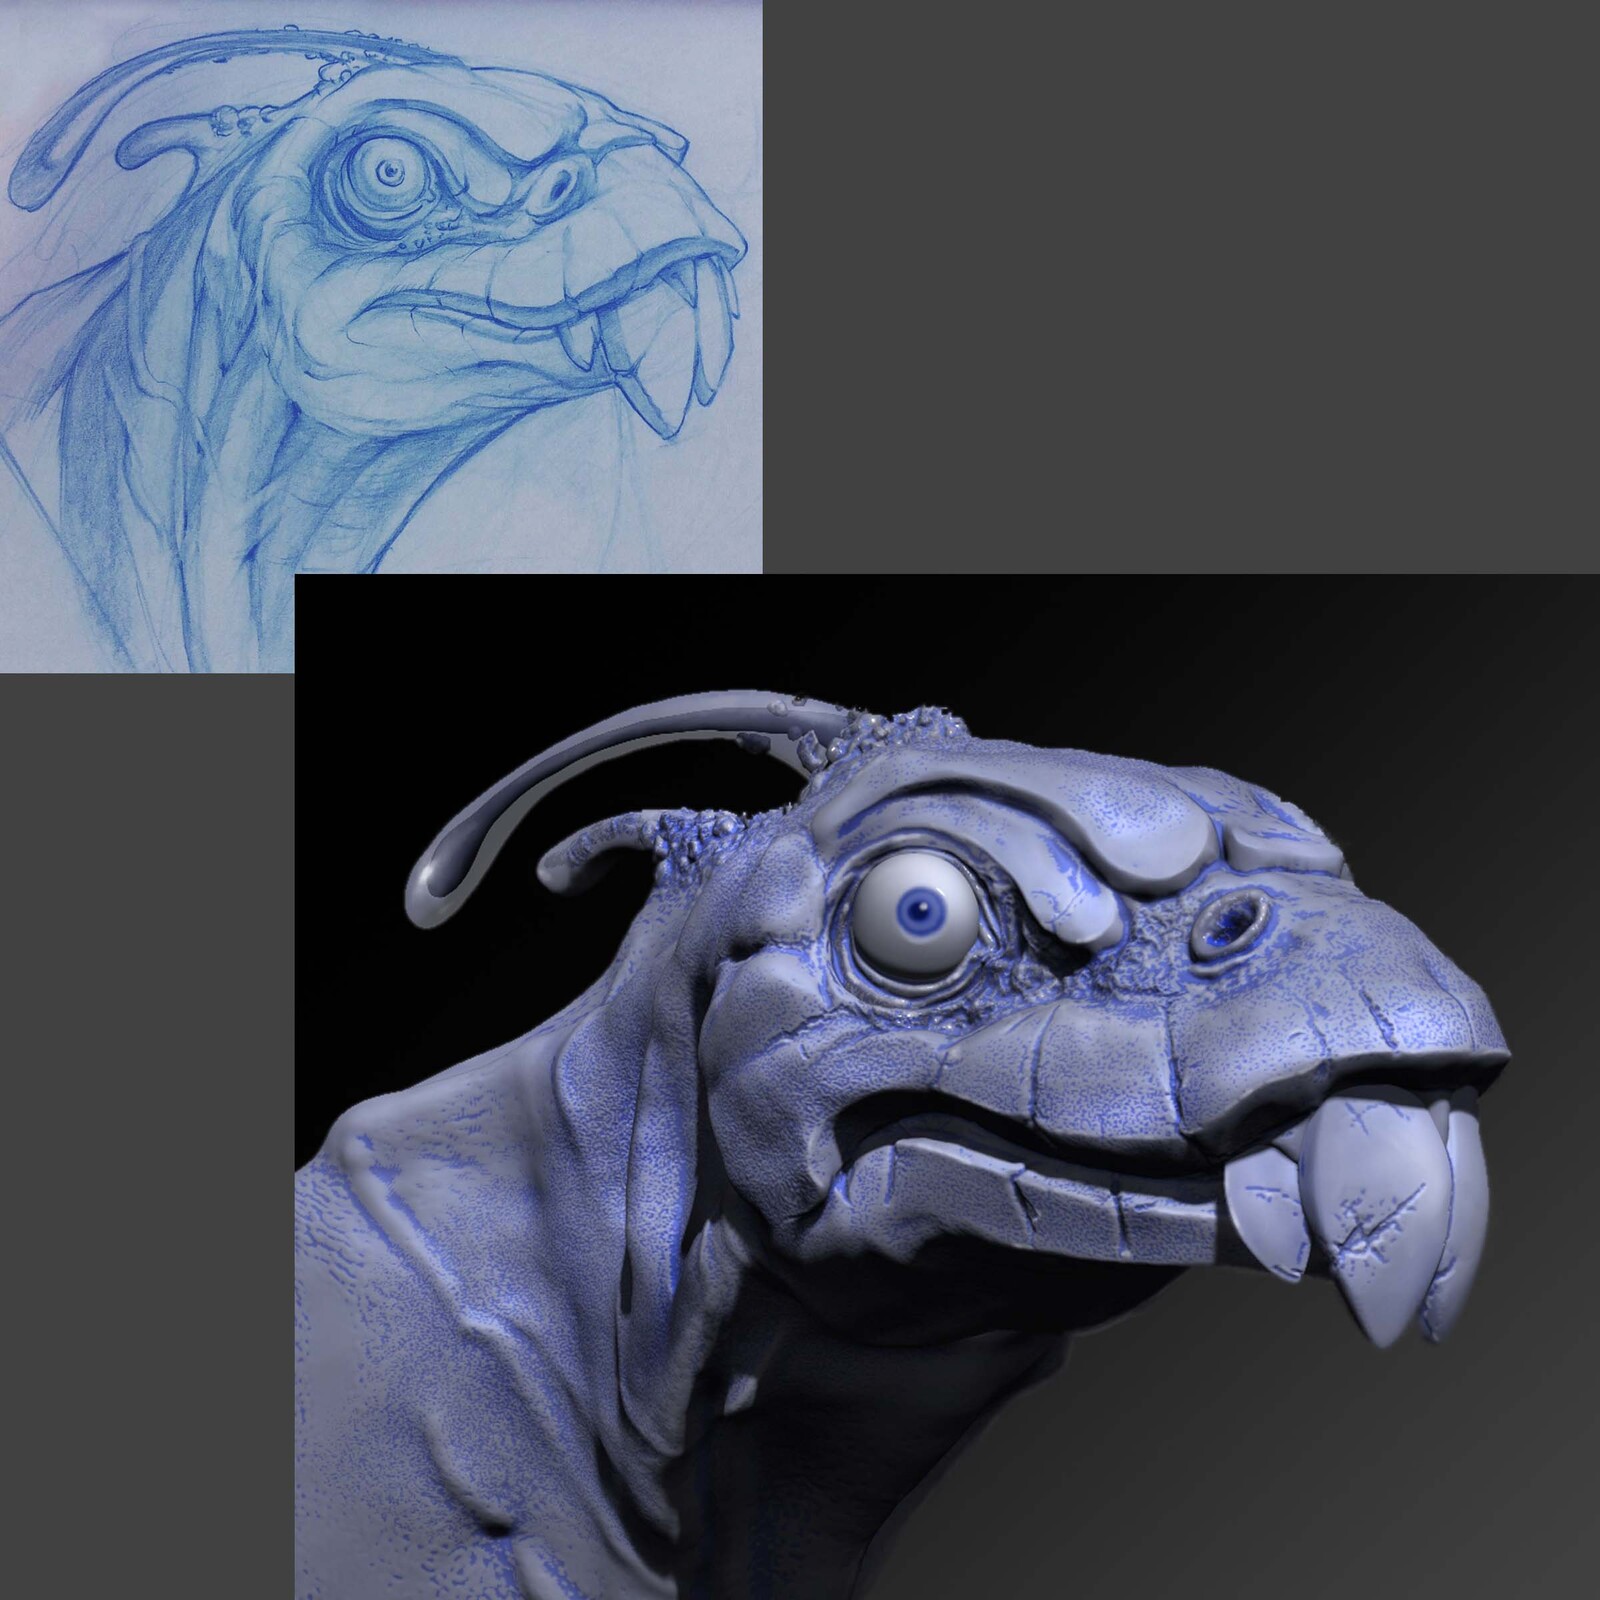 Thanks to @carlos3art for giving me the holy okie doke to take a stab at reimagining this parrot-piranha-chicken-fish Thing in Zbrush! (Revision)

#scarymonsters #chickenfishthing #dopylookingbutdeadly #orthodonticnightmare #whatwouldyoucallit ??